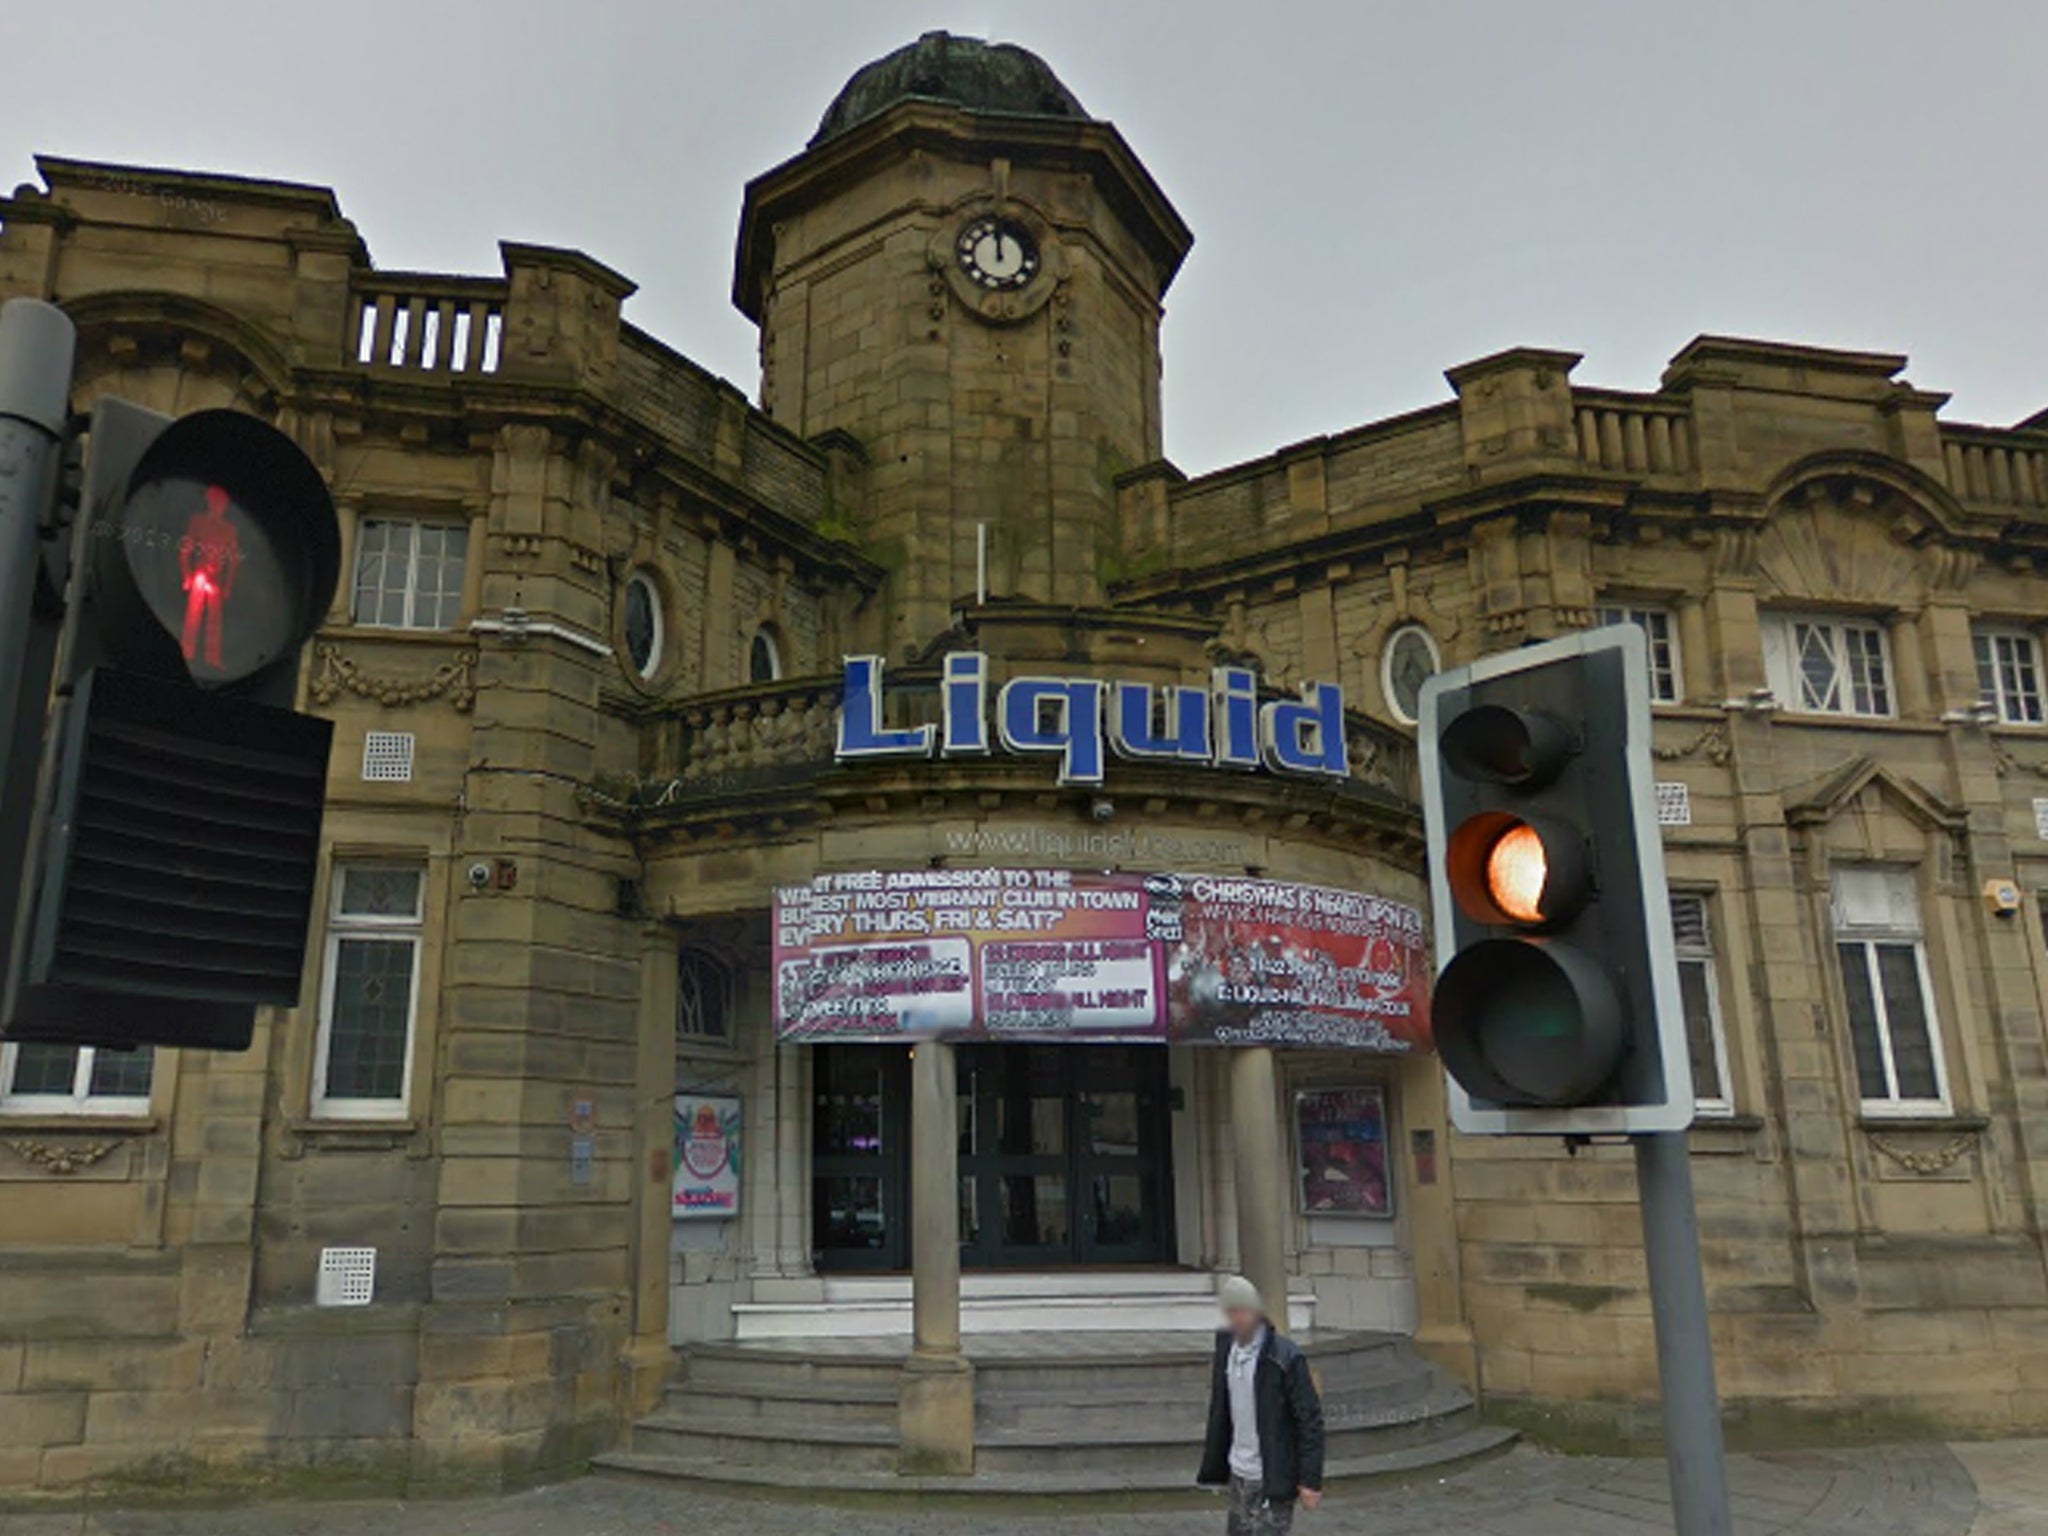 The attack happened at Liquid nightclub in Halifax in the early hours of Sunday morning